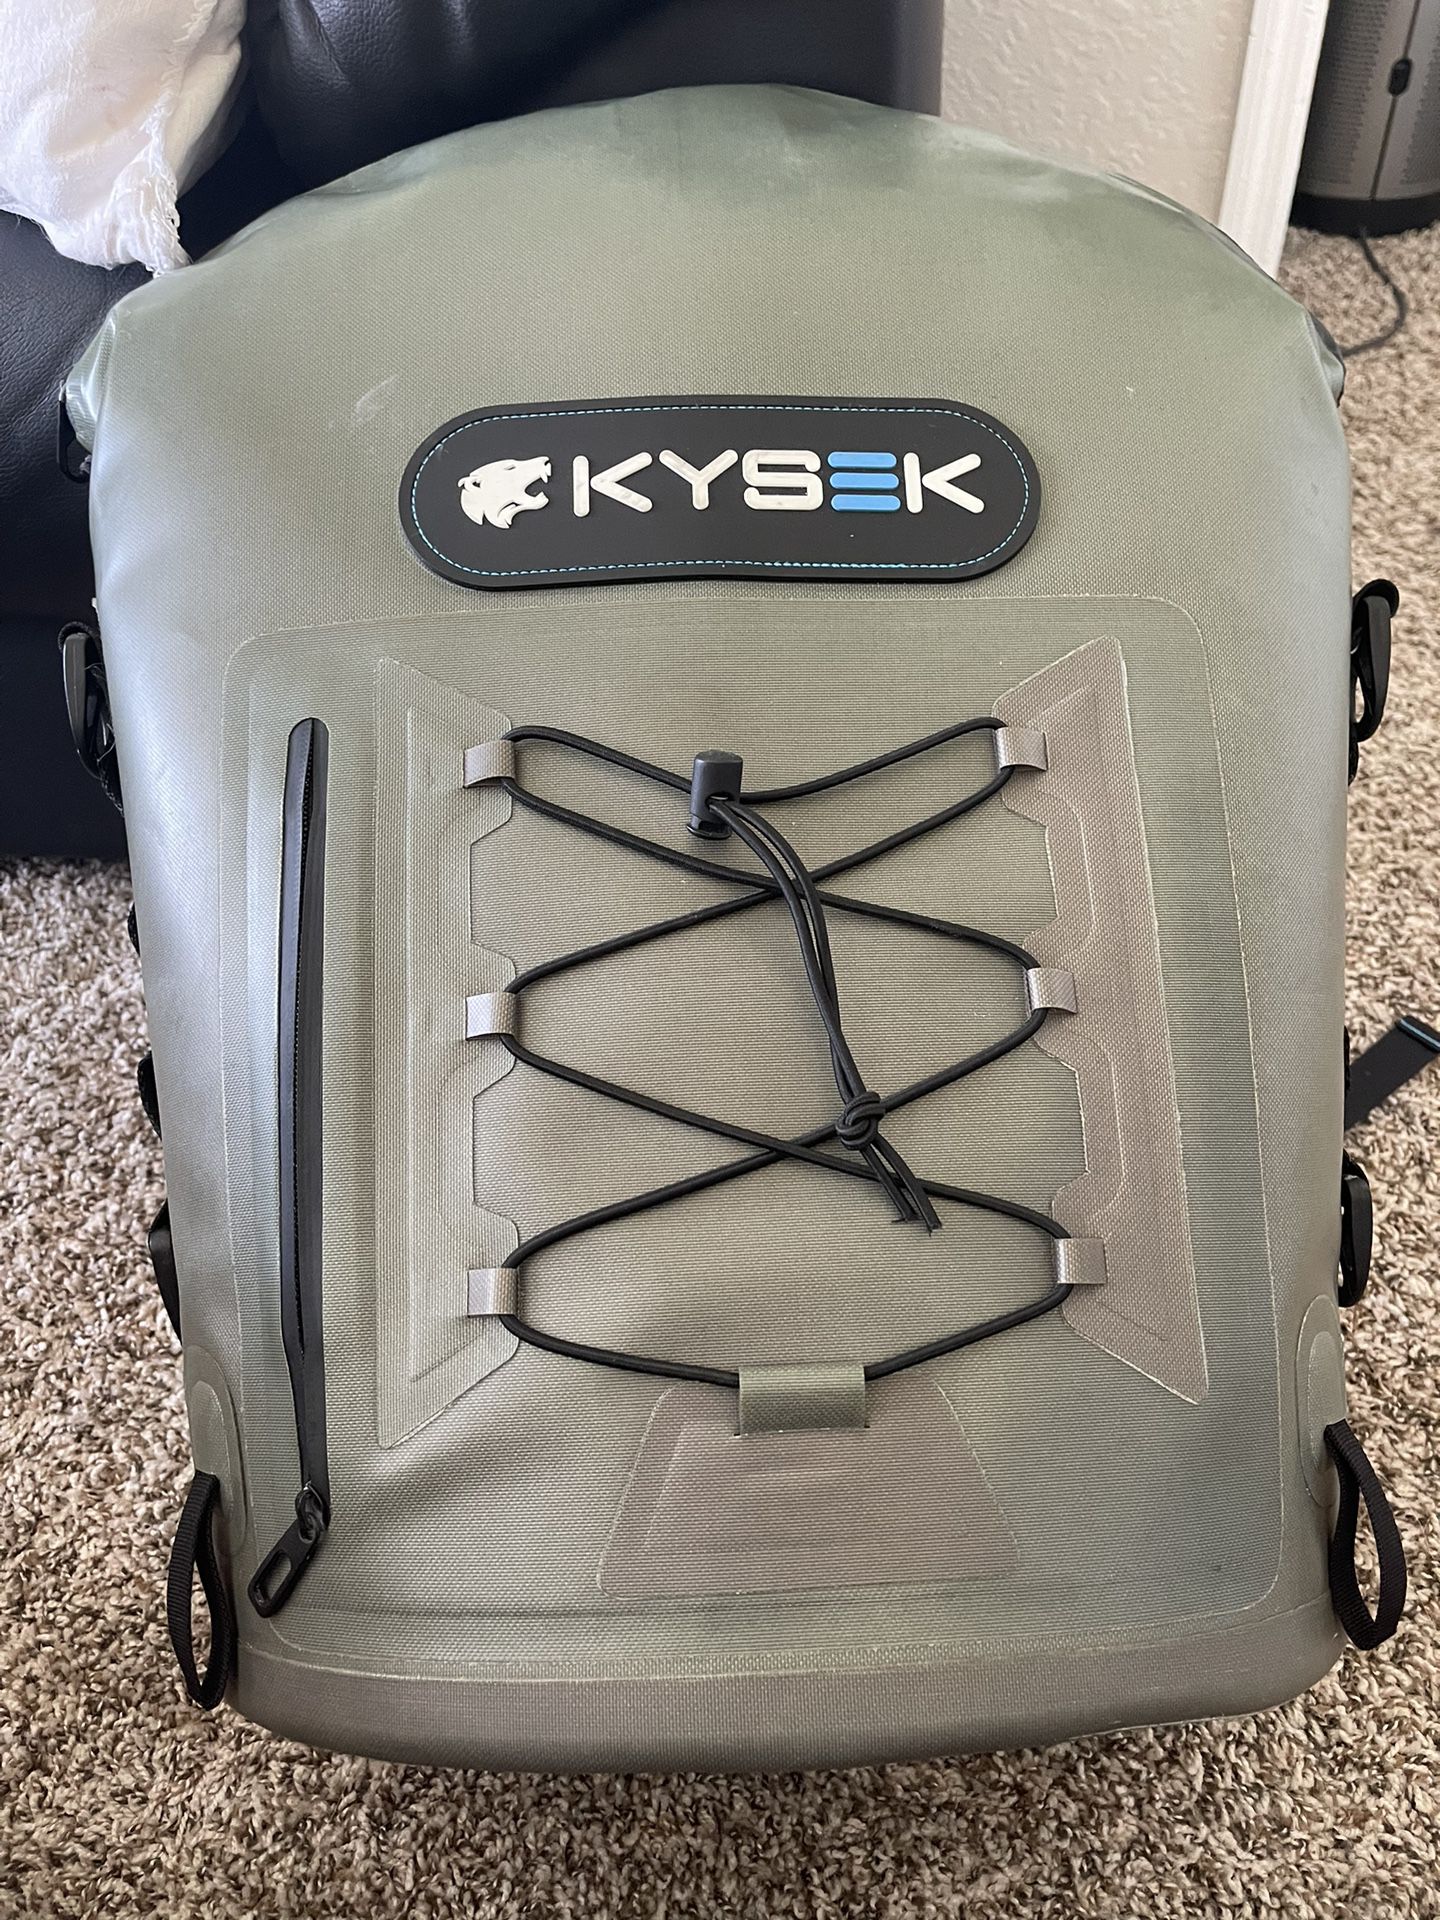 Kysek Cooler Backpack - Yeti Competitor